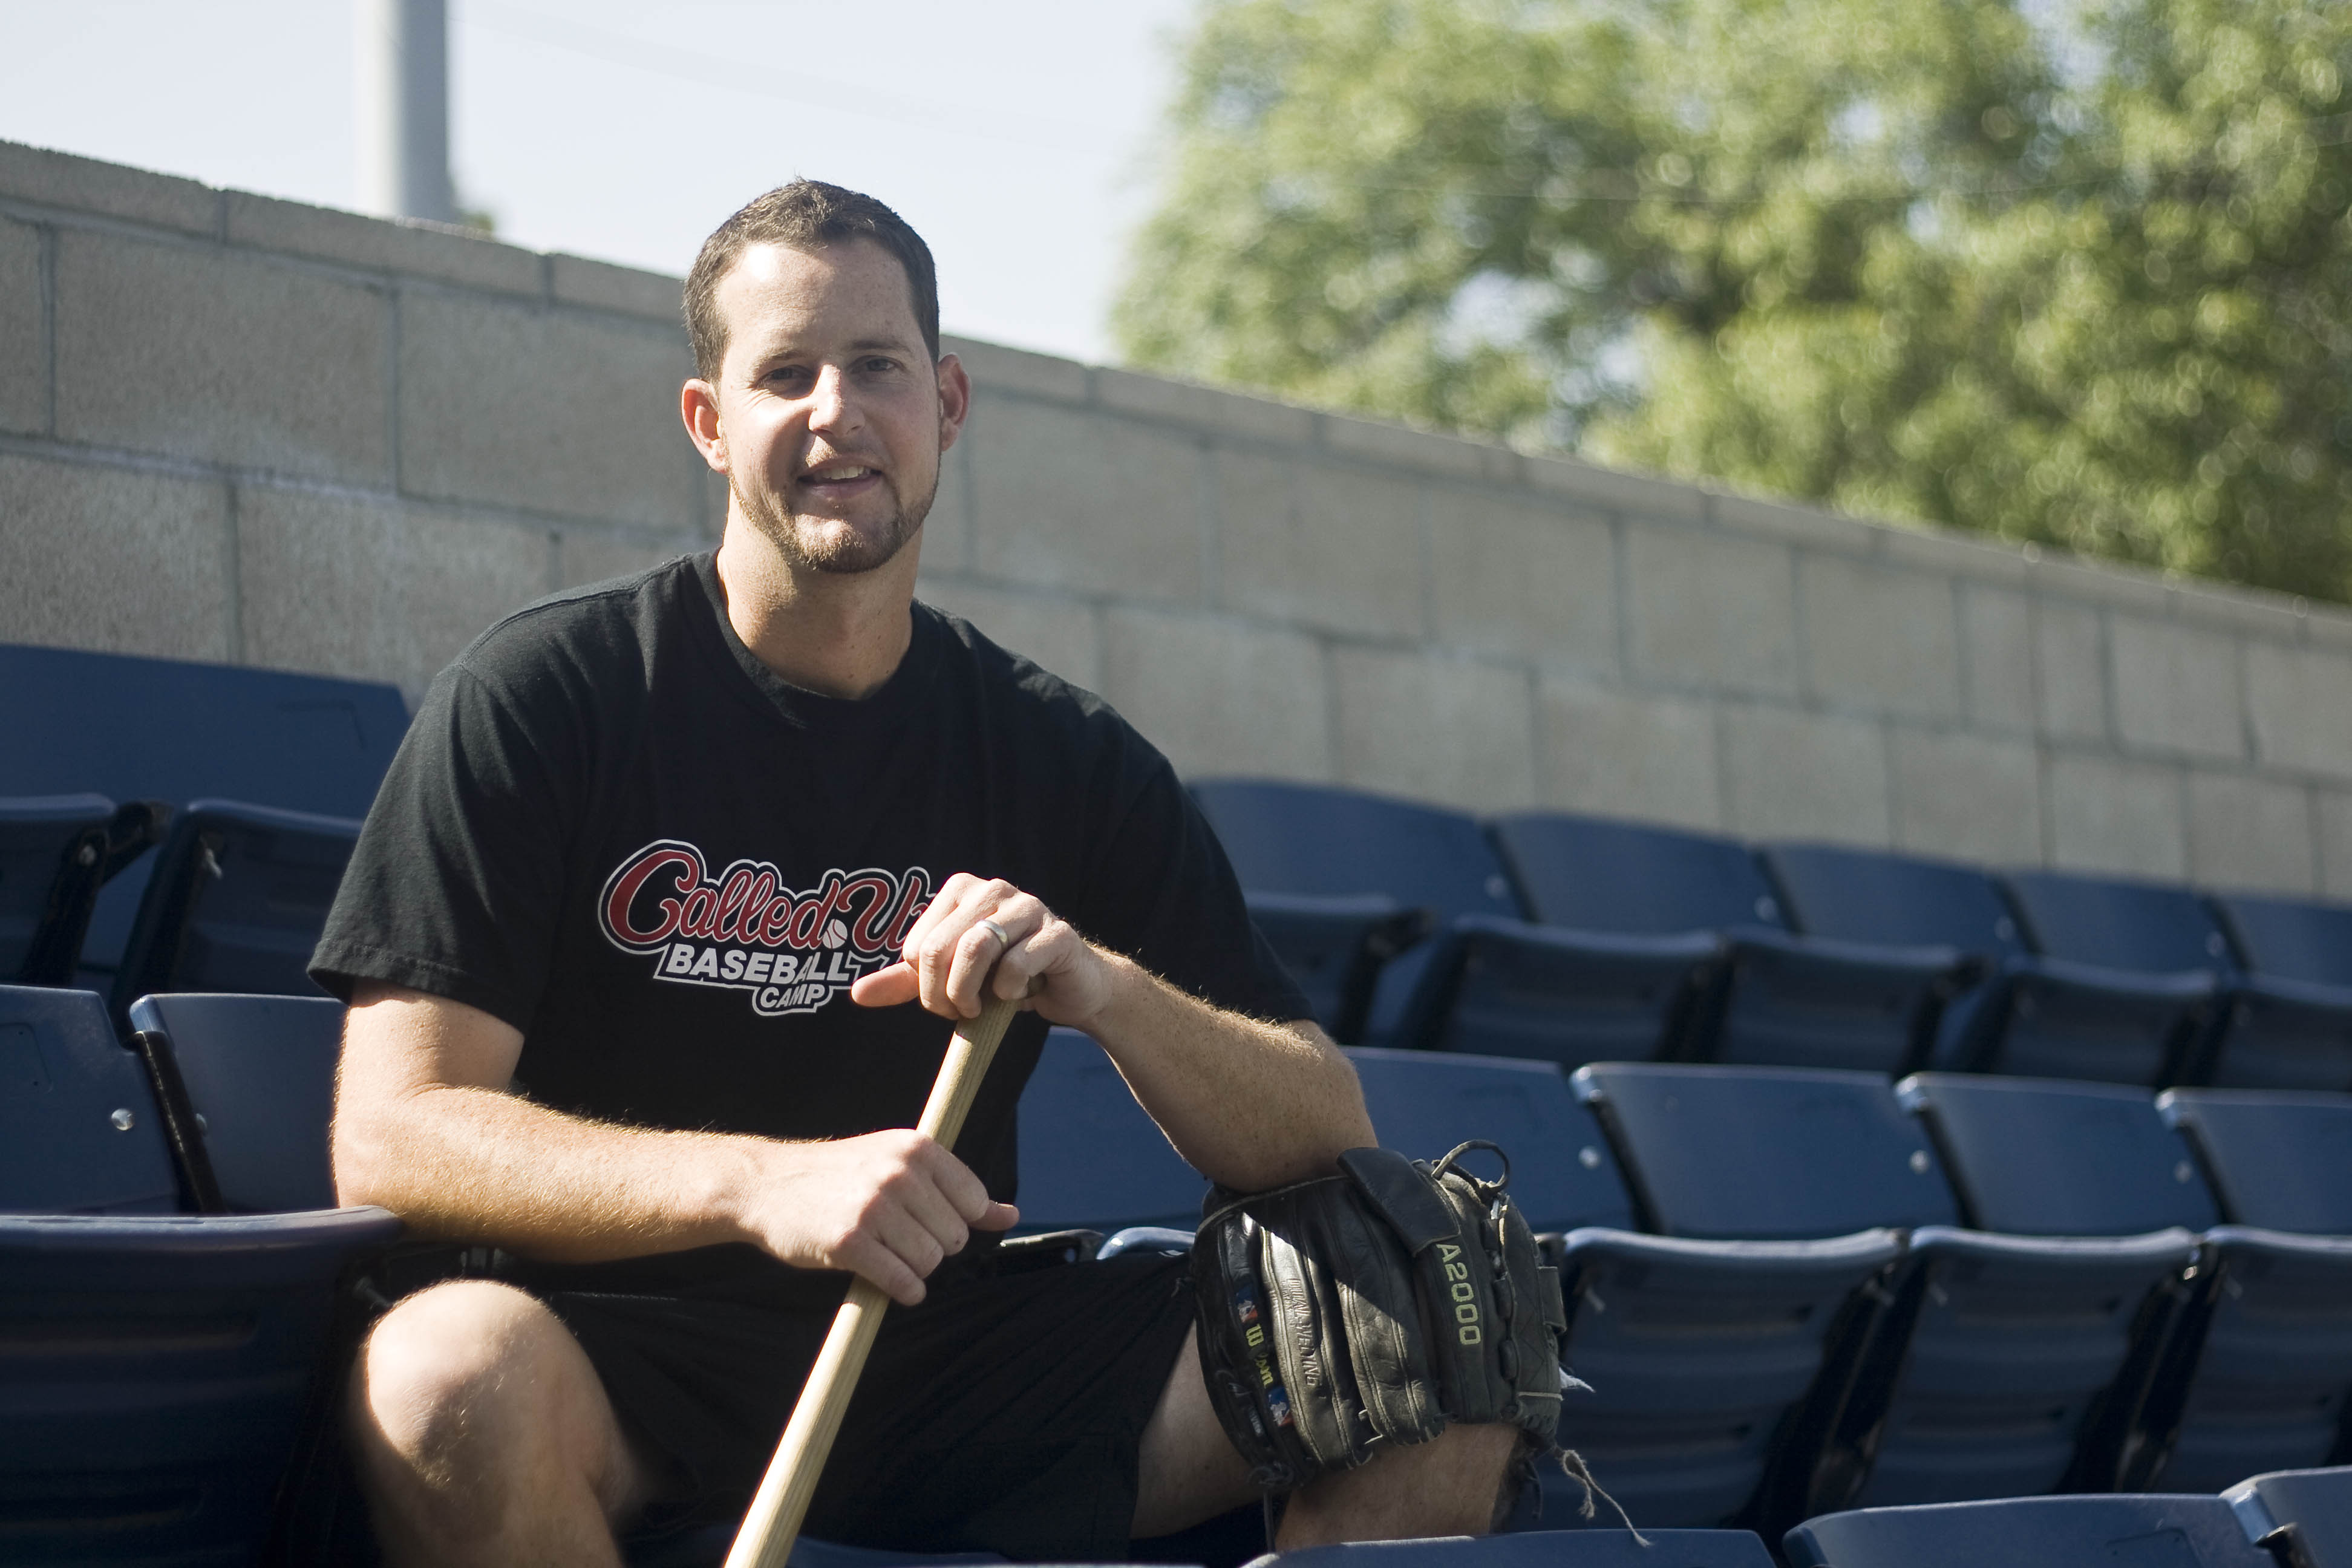 Ben Orr, a Biola grad. started the sports ministry camp Called Up Baseball in 2002 with the help of Missionary Athletes International. Called Up Baseball employs three former minor league players, five former Biola players, and two students who currently play on Biolas baseball team. 